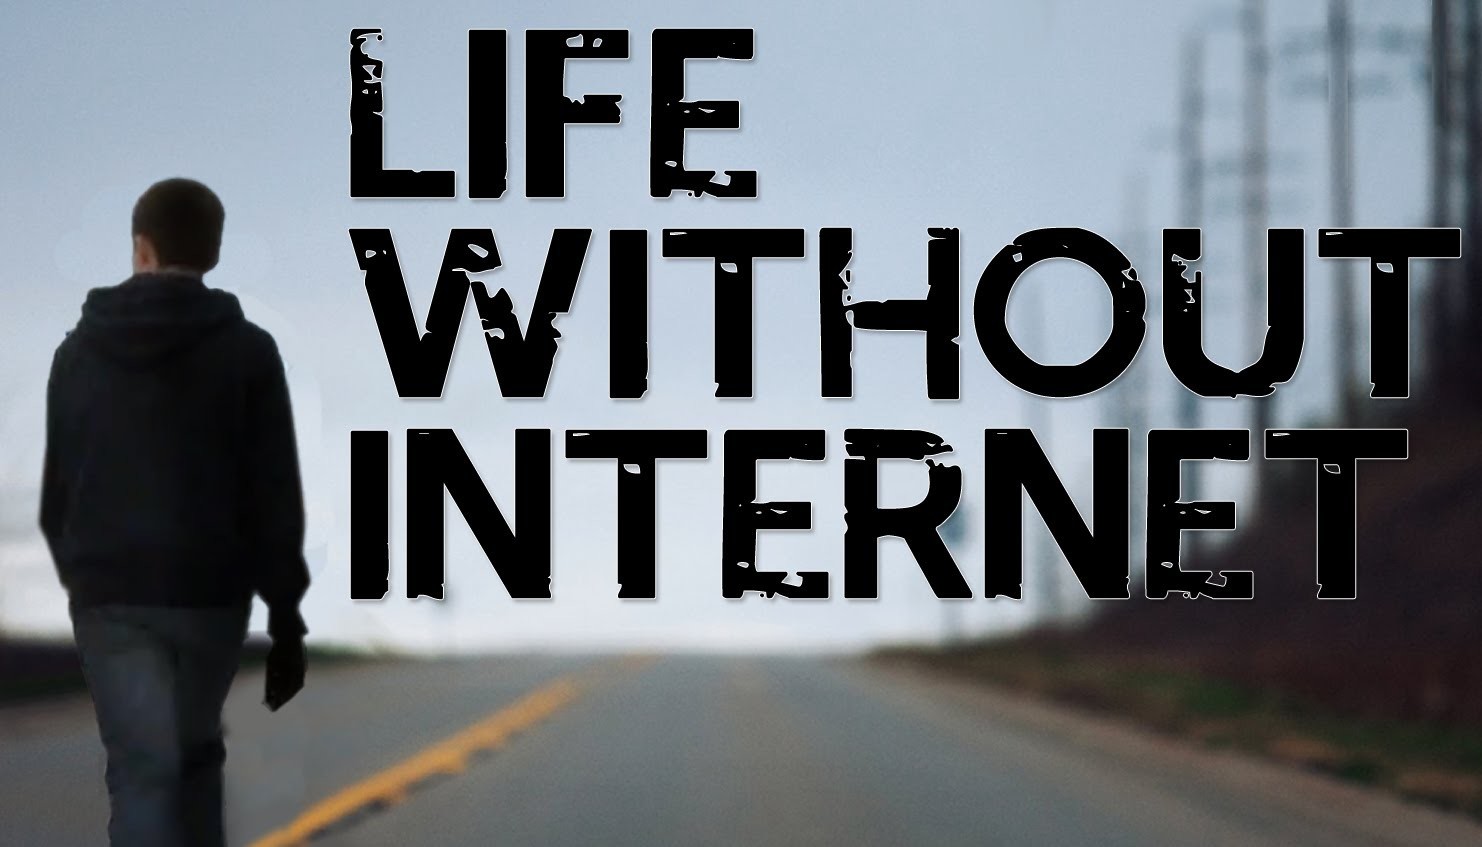 Real our life. No Internet. Without Internet. My Life without Internet. Living without the Internet.